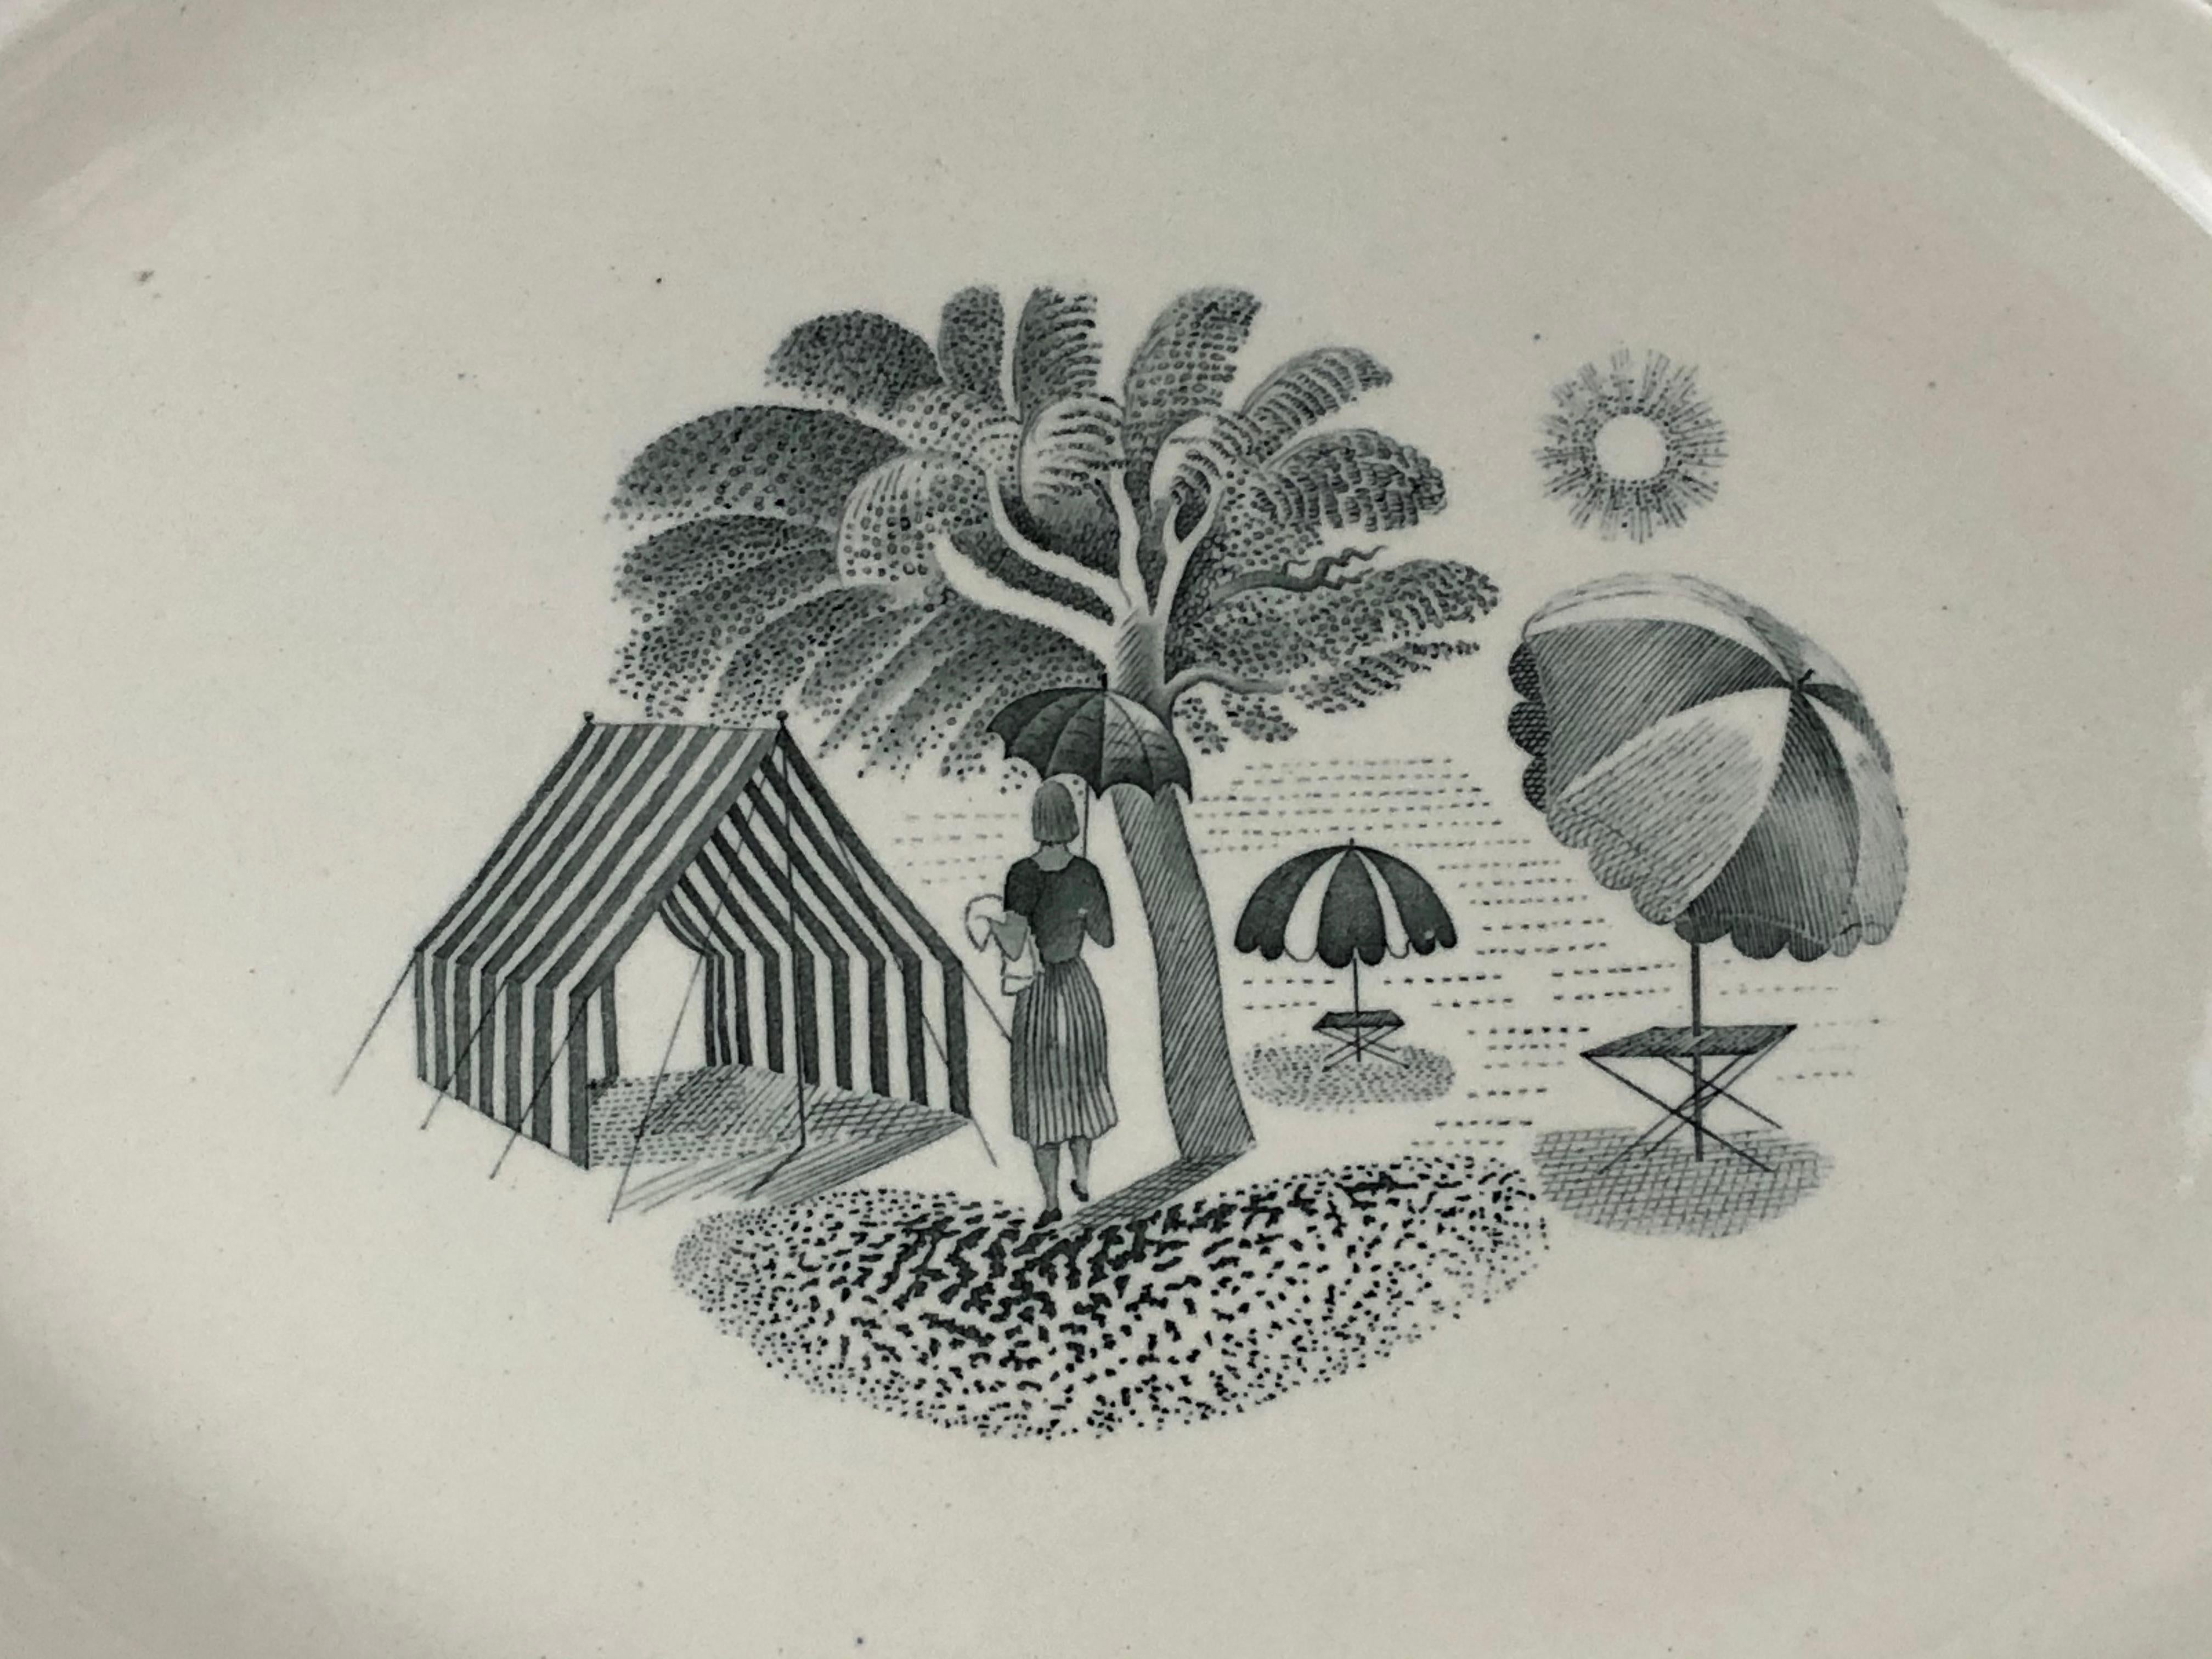 A rare, early Eric Ravilious designed oval platter for Wedgwood from the Garden Series, depicting a woman under a tree with umbrellas and a striped tent nearby, within a sunny landscape, with decorative ribbon bands around the perimeter. In transfer